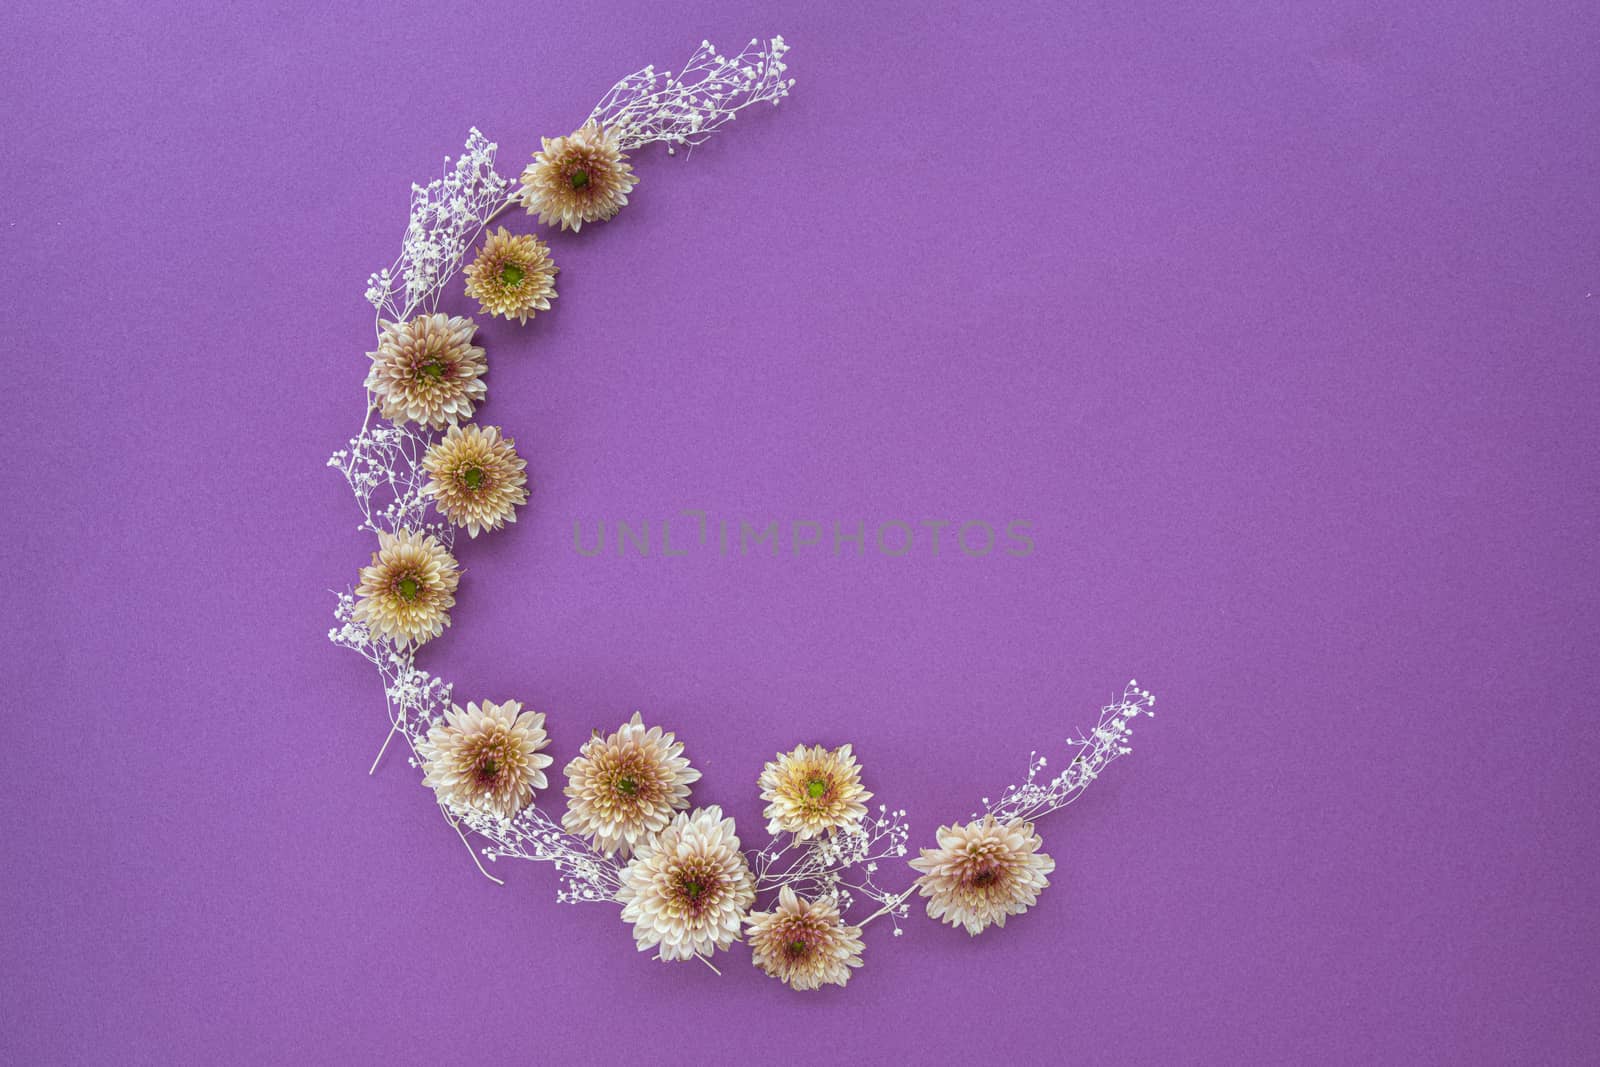 Beautiful mums and tiny white dried flowers in crescent shape frame pattern. Purple background. Top view with copy space. Mock up autumn flowers concept.